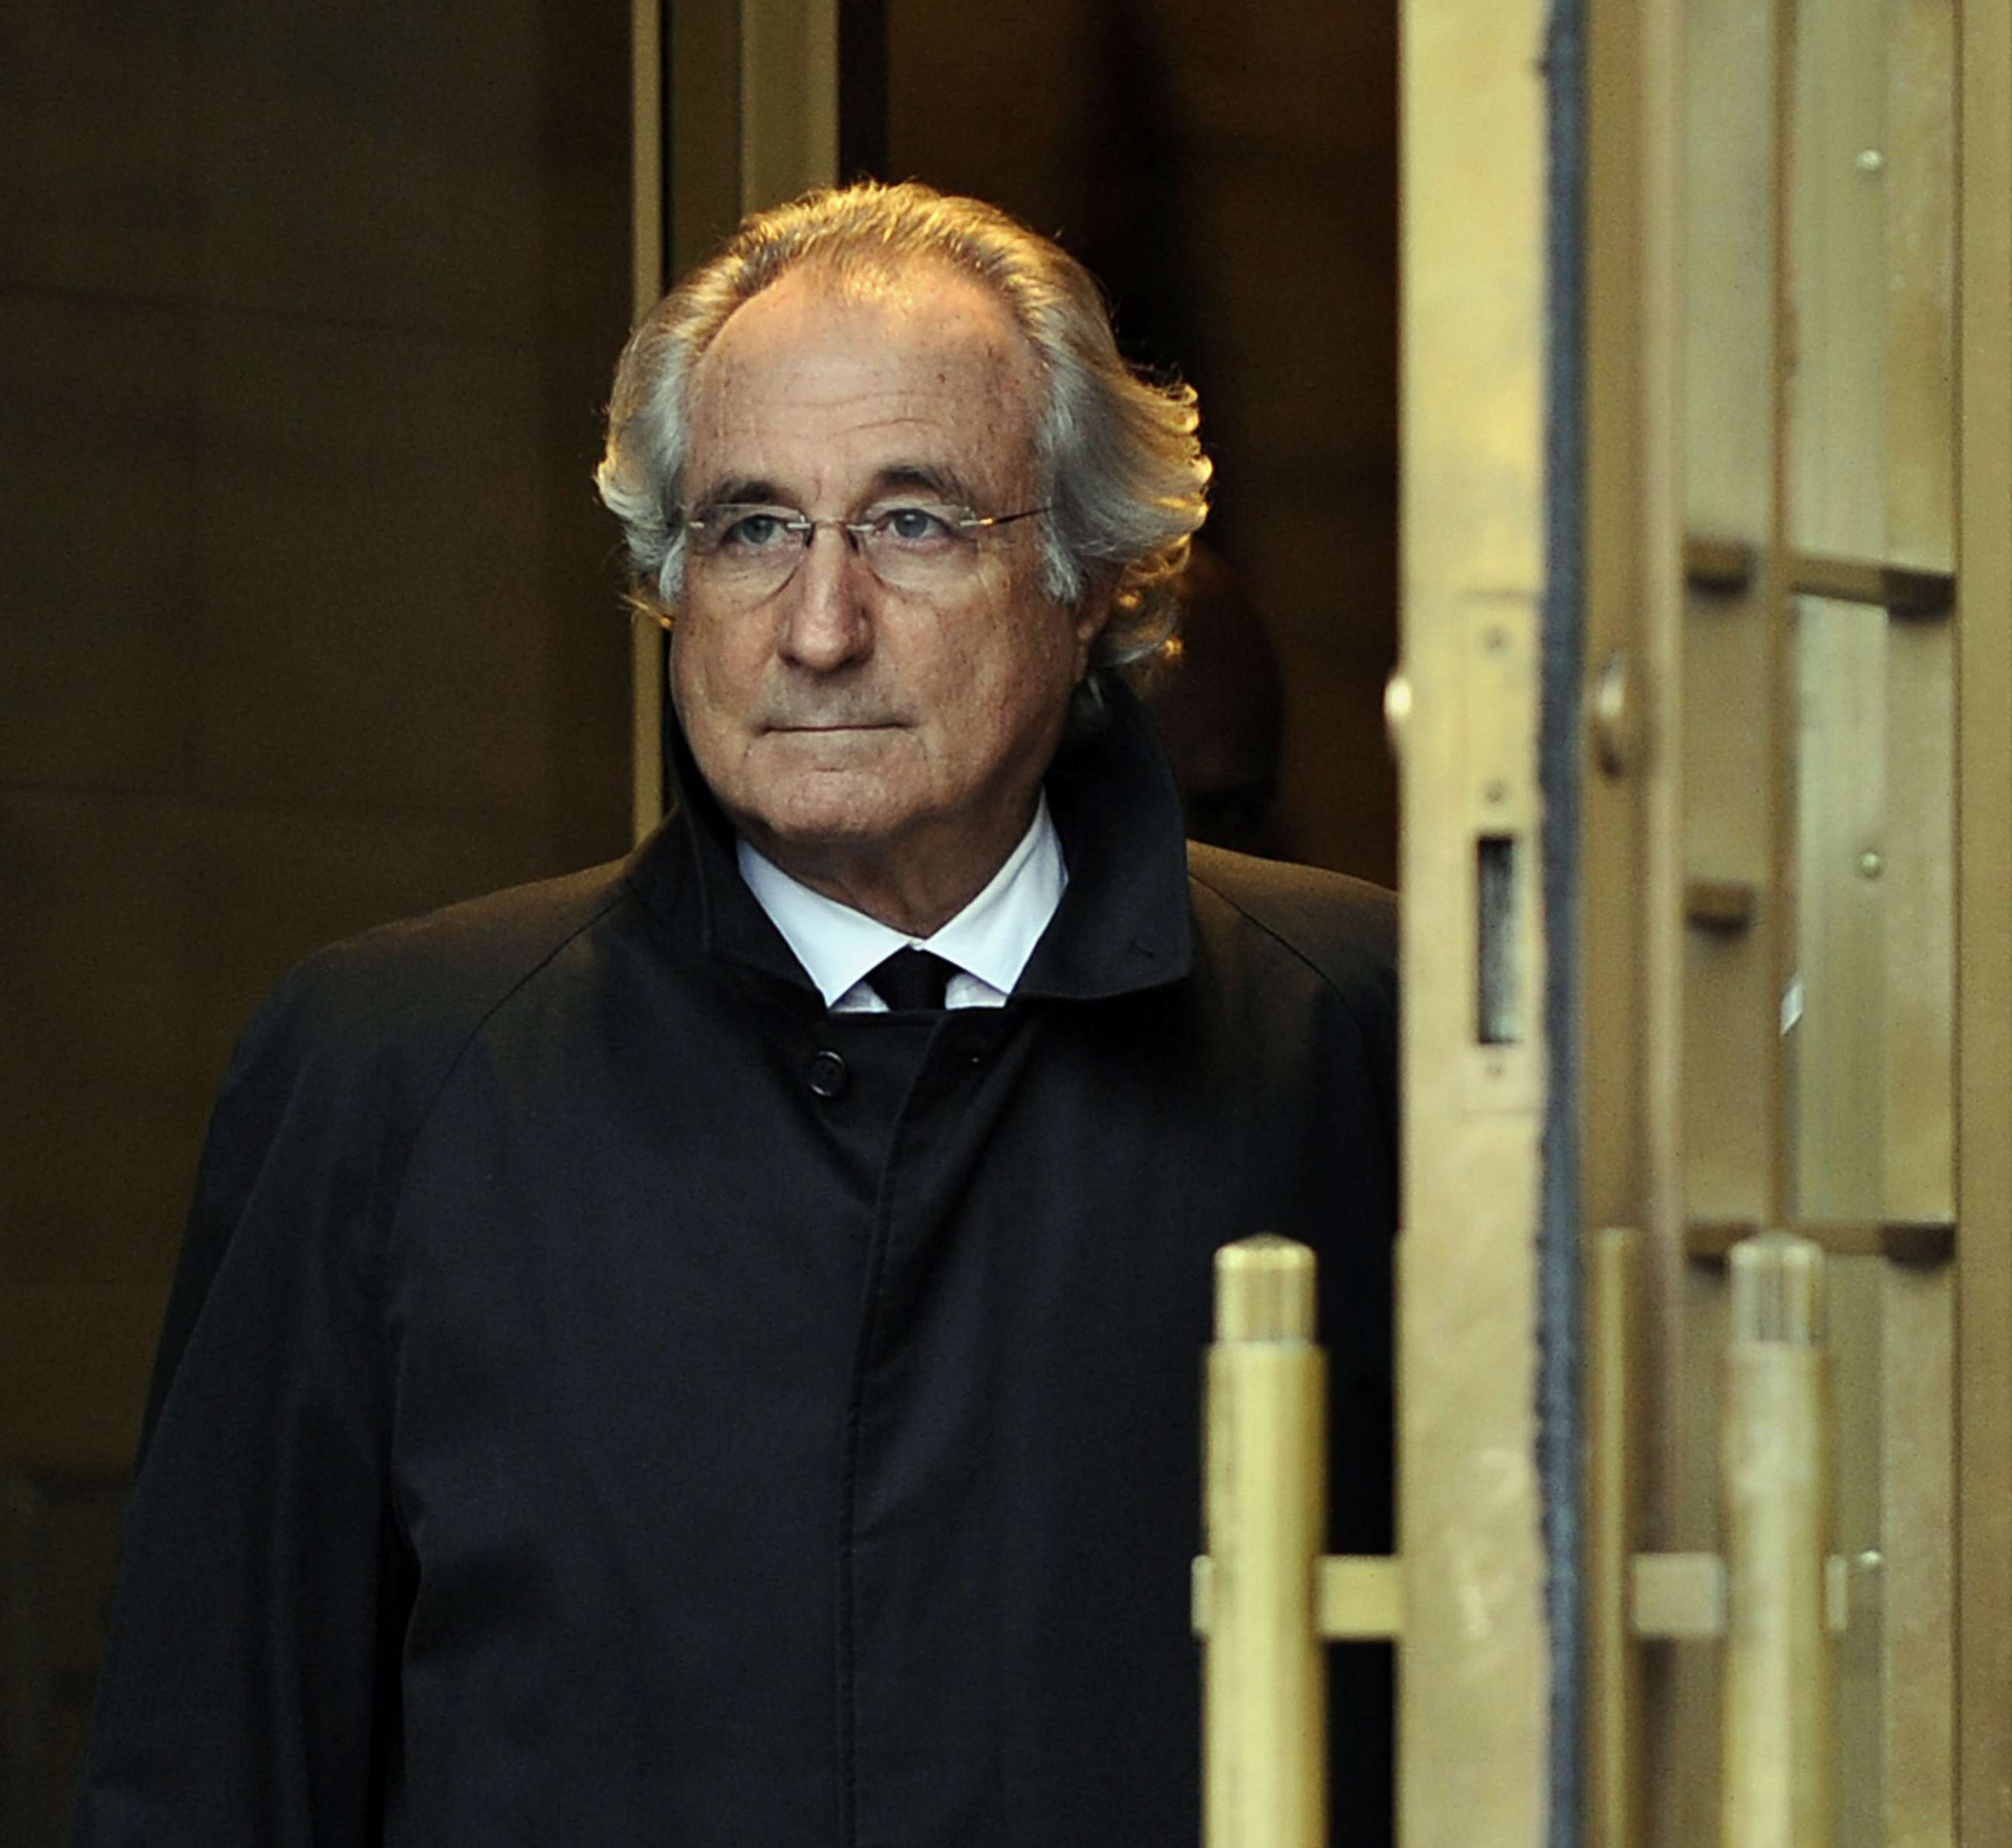 PHOTO: In this Jan. 14, 2009, file photo, Bernard Madoff leaves US Federal Court in New York after a hearing regarding his bail.